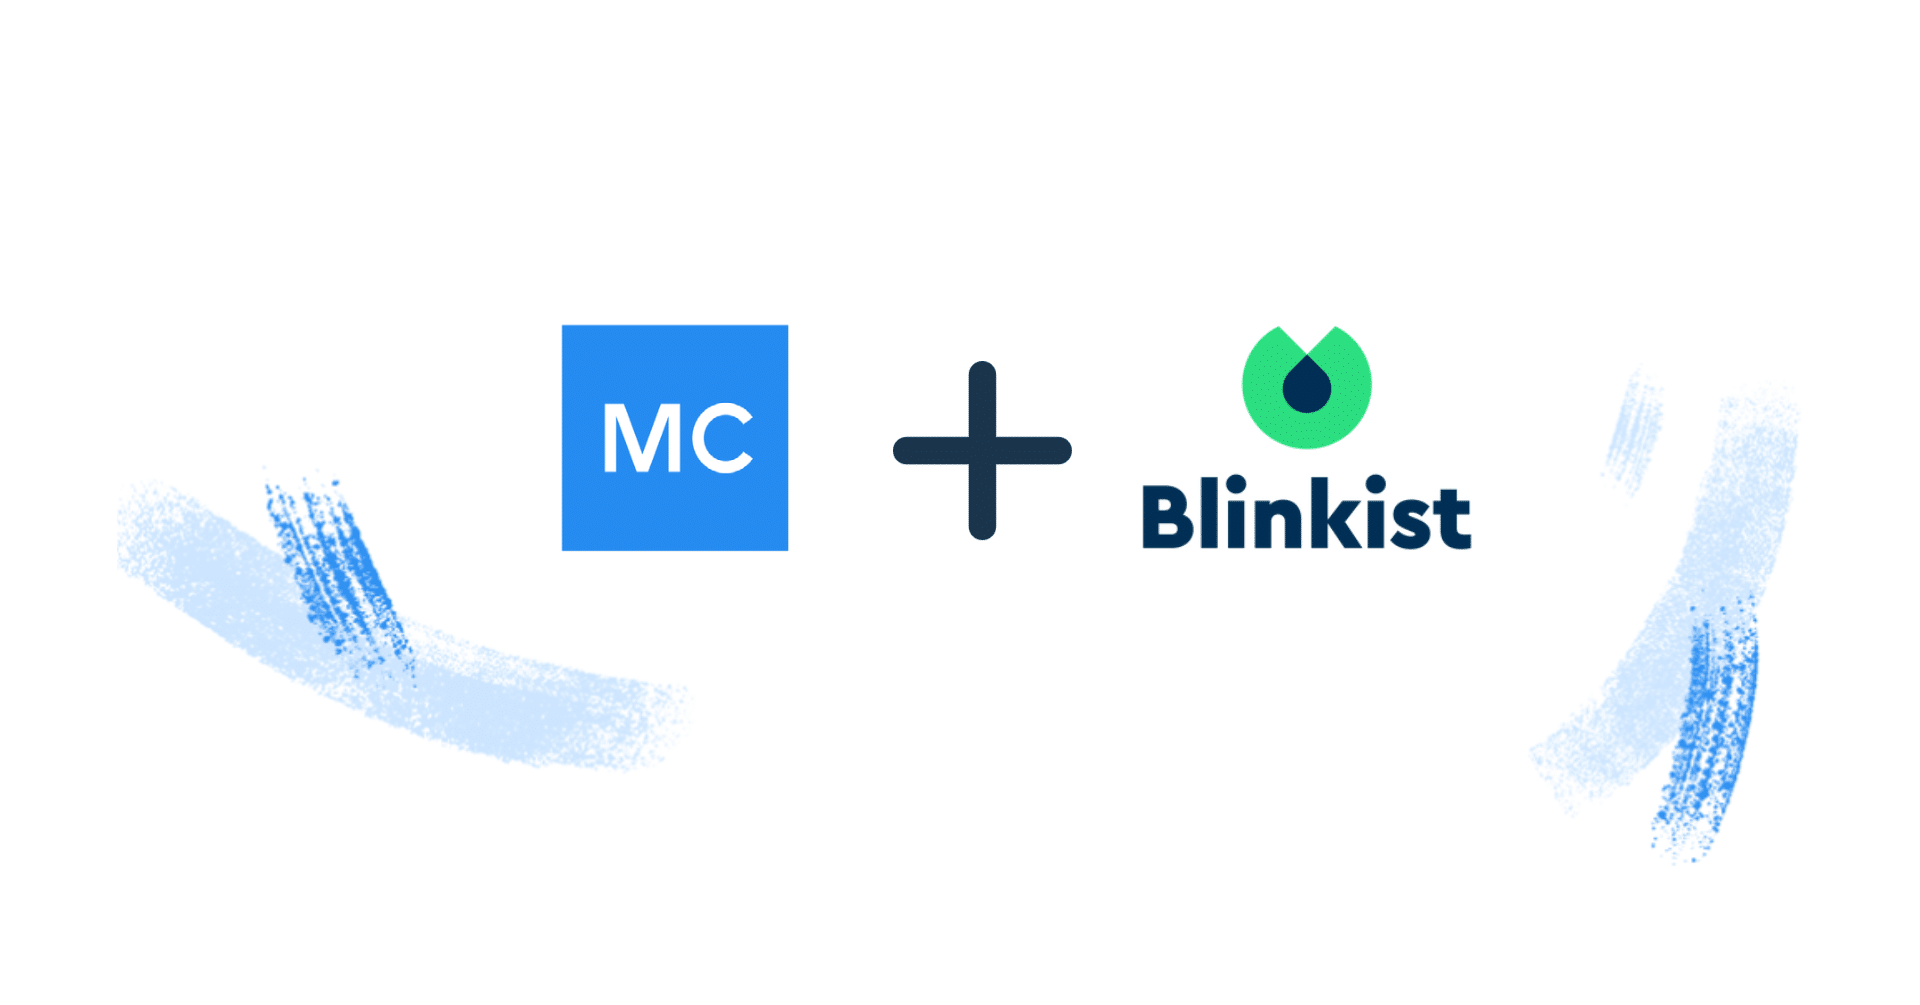 Blinkist Chooses Monte Carlo to Deliver More Reliable Data Pipelines Through Data Observability